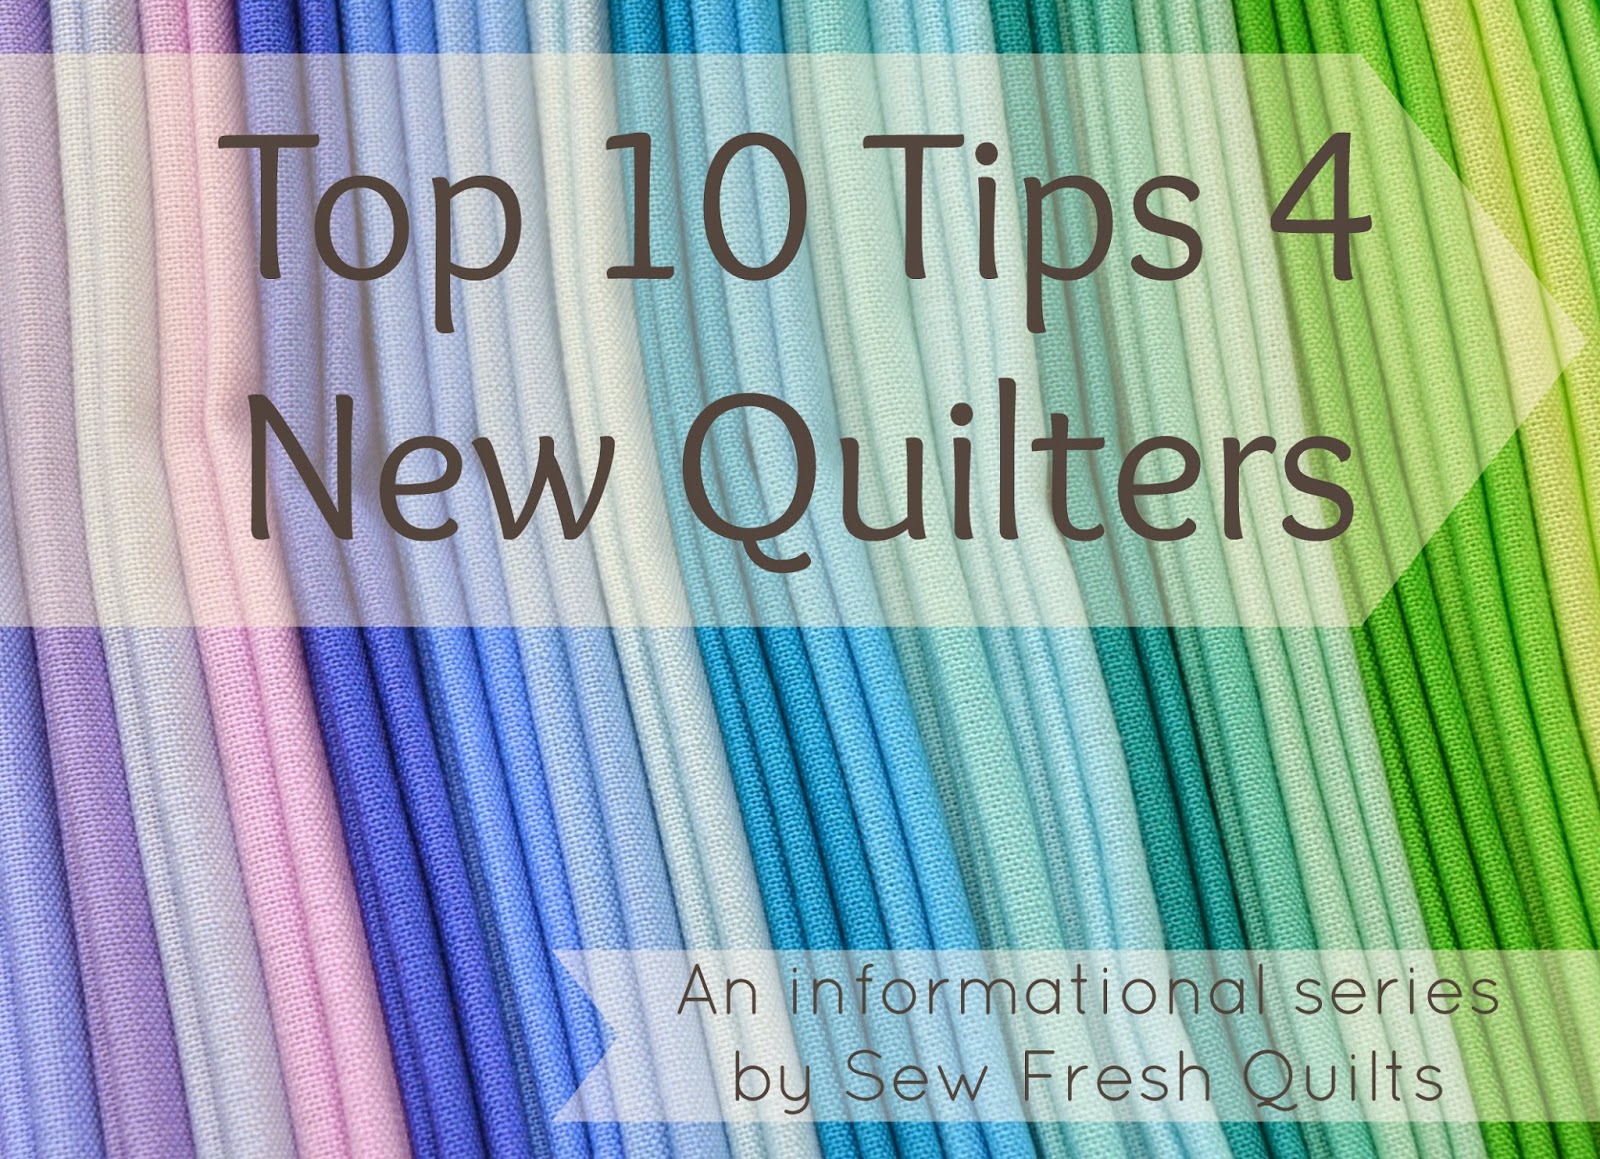 http://sewfreshquilts.blogspot.ca/2014/08/top-10-tips-for-new-quilters.html